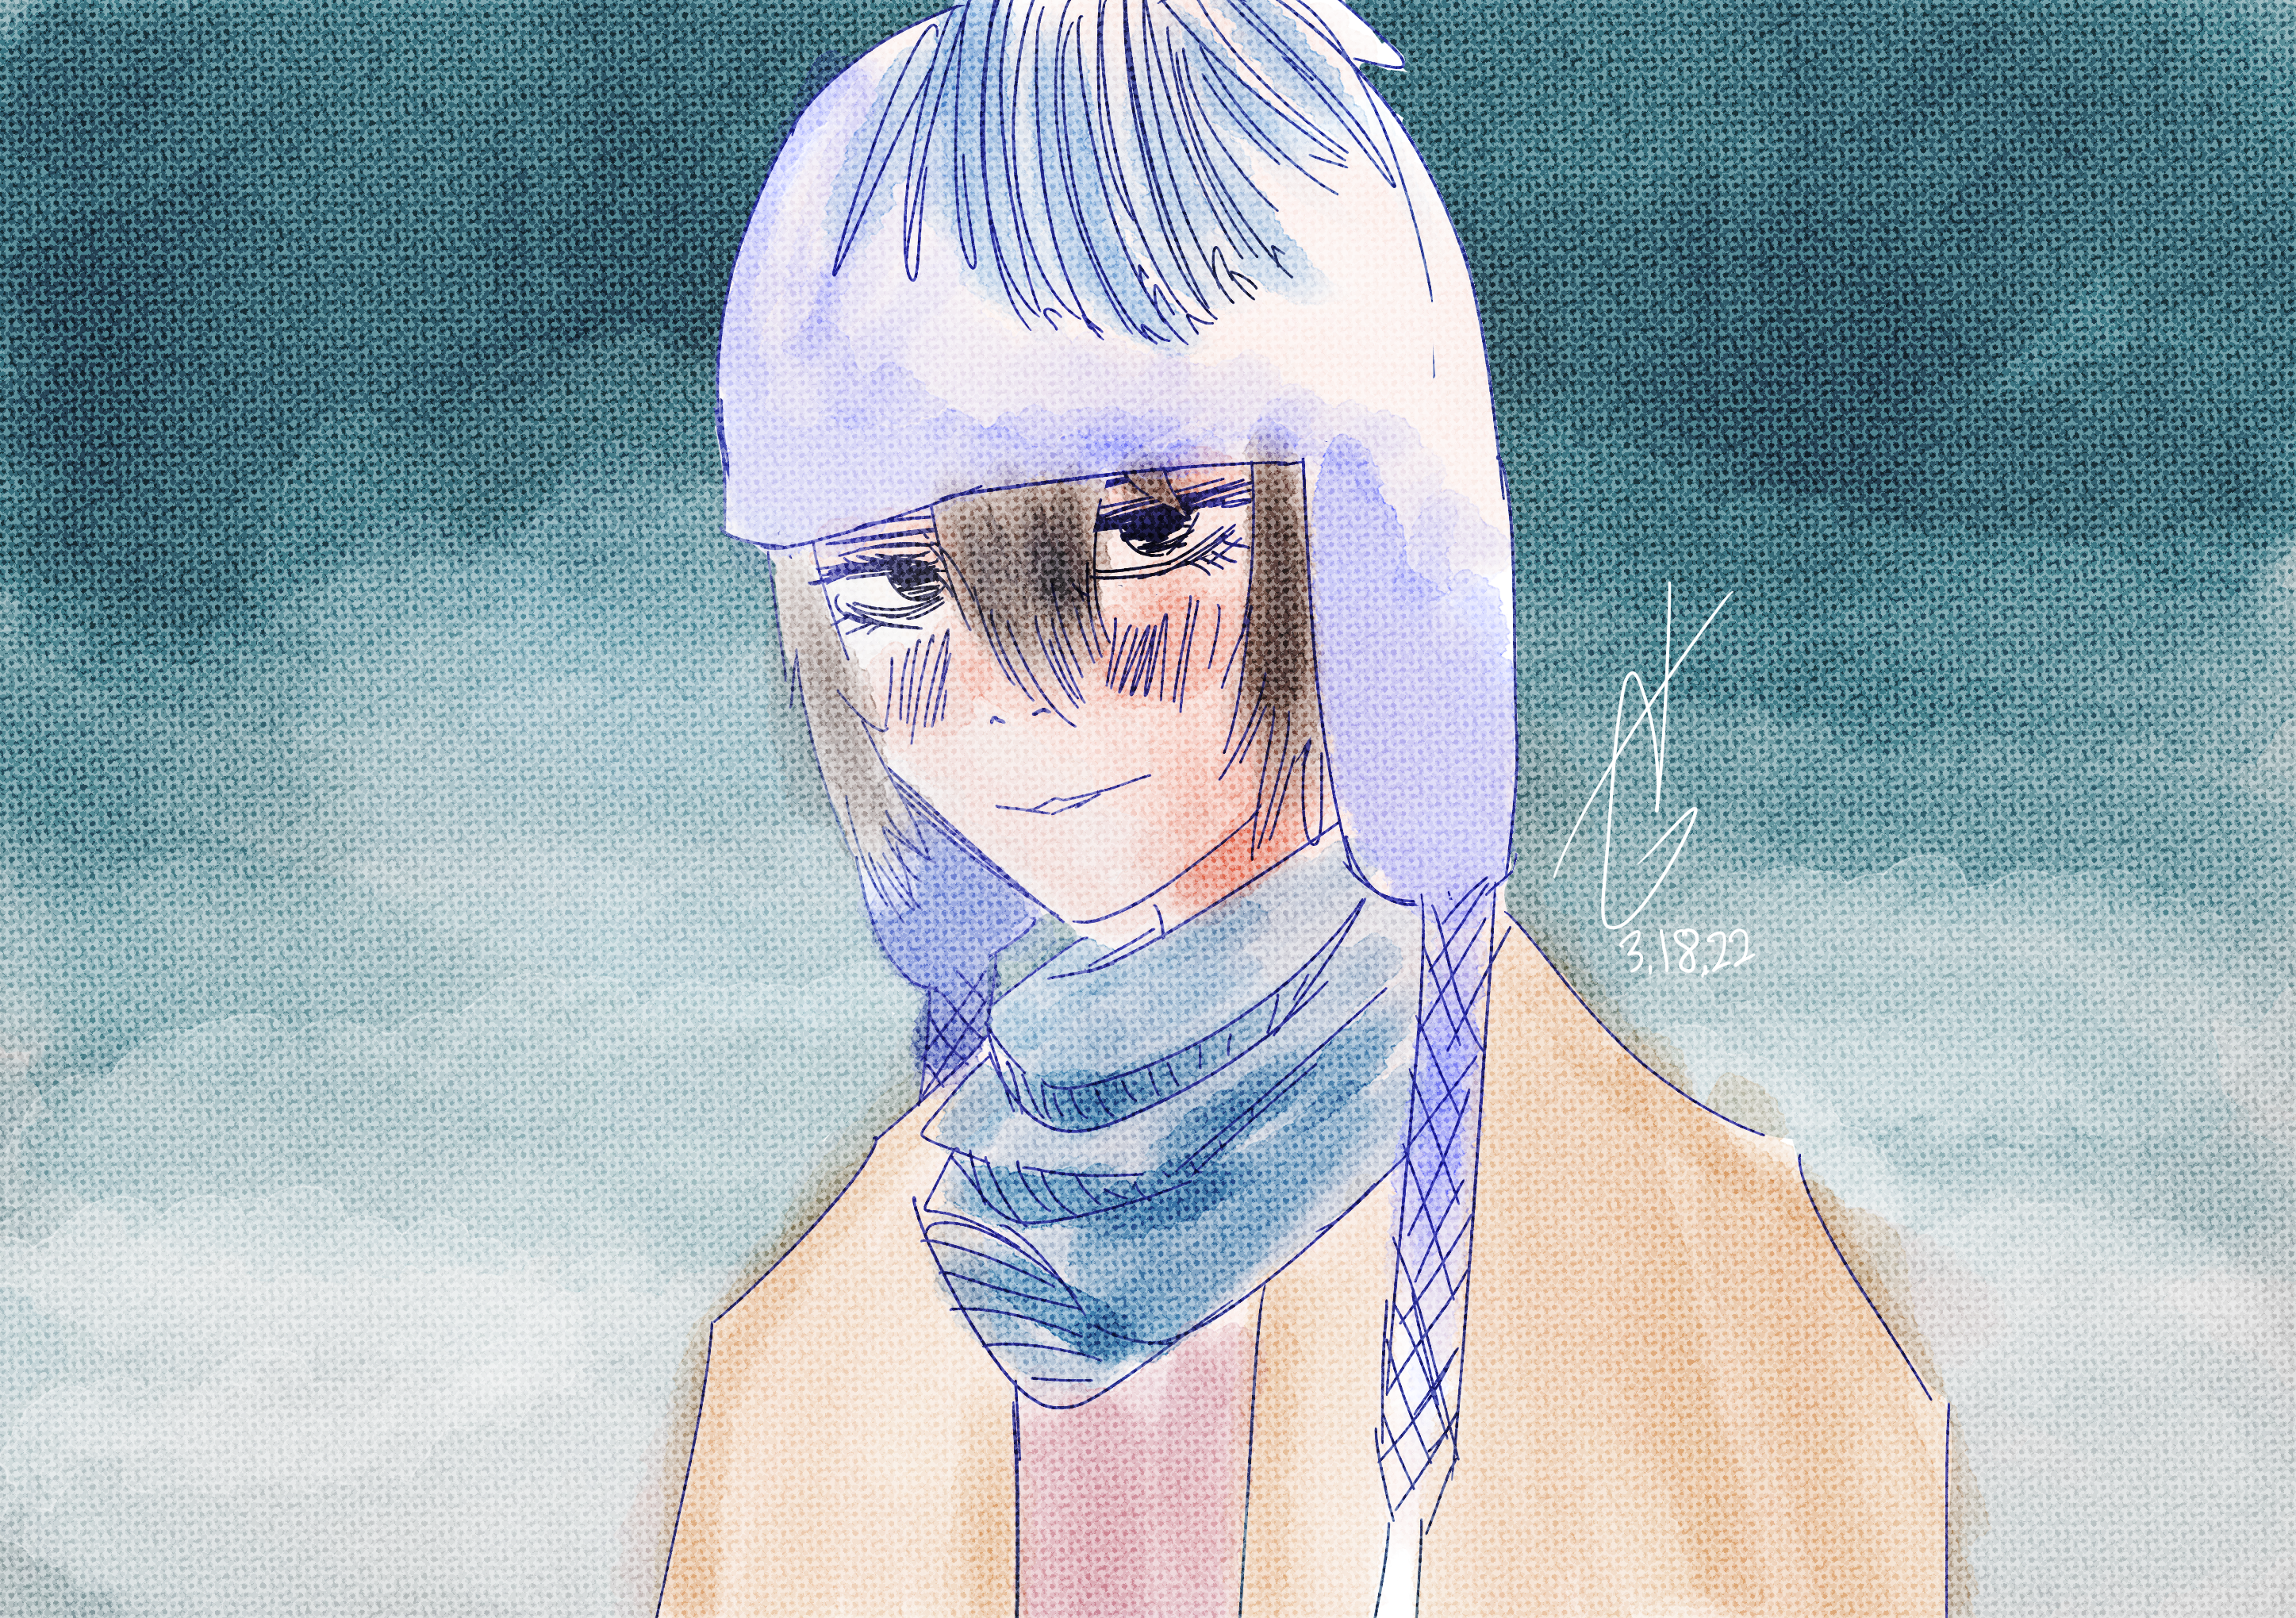 Doodle of a girl in the wintertime.